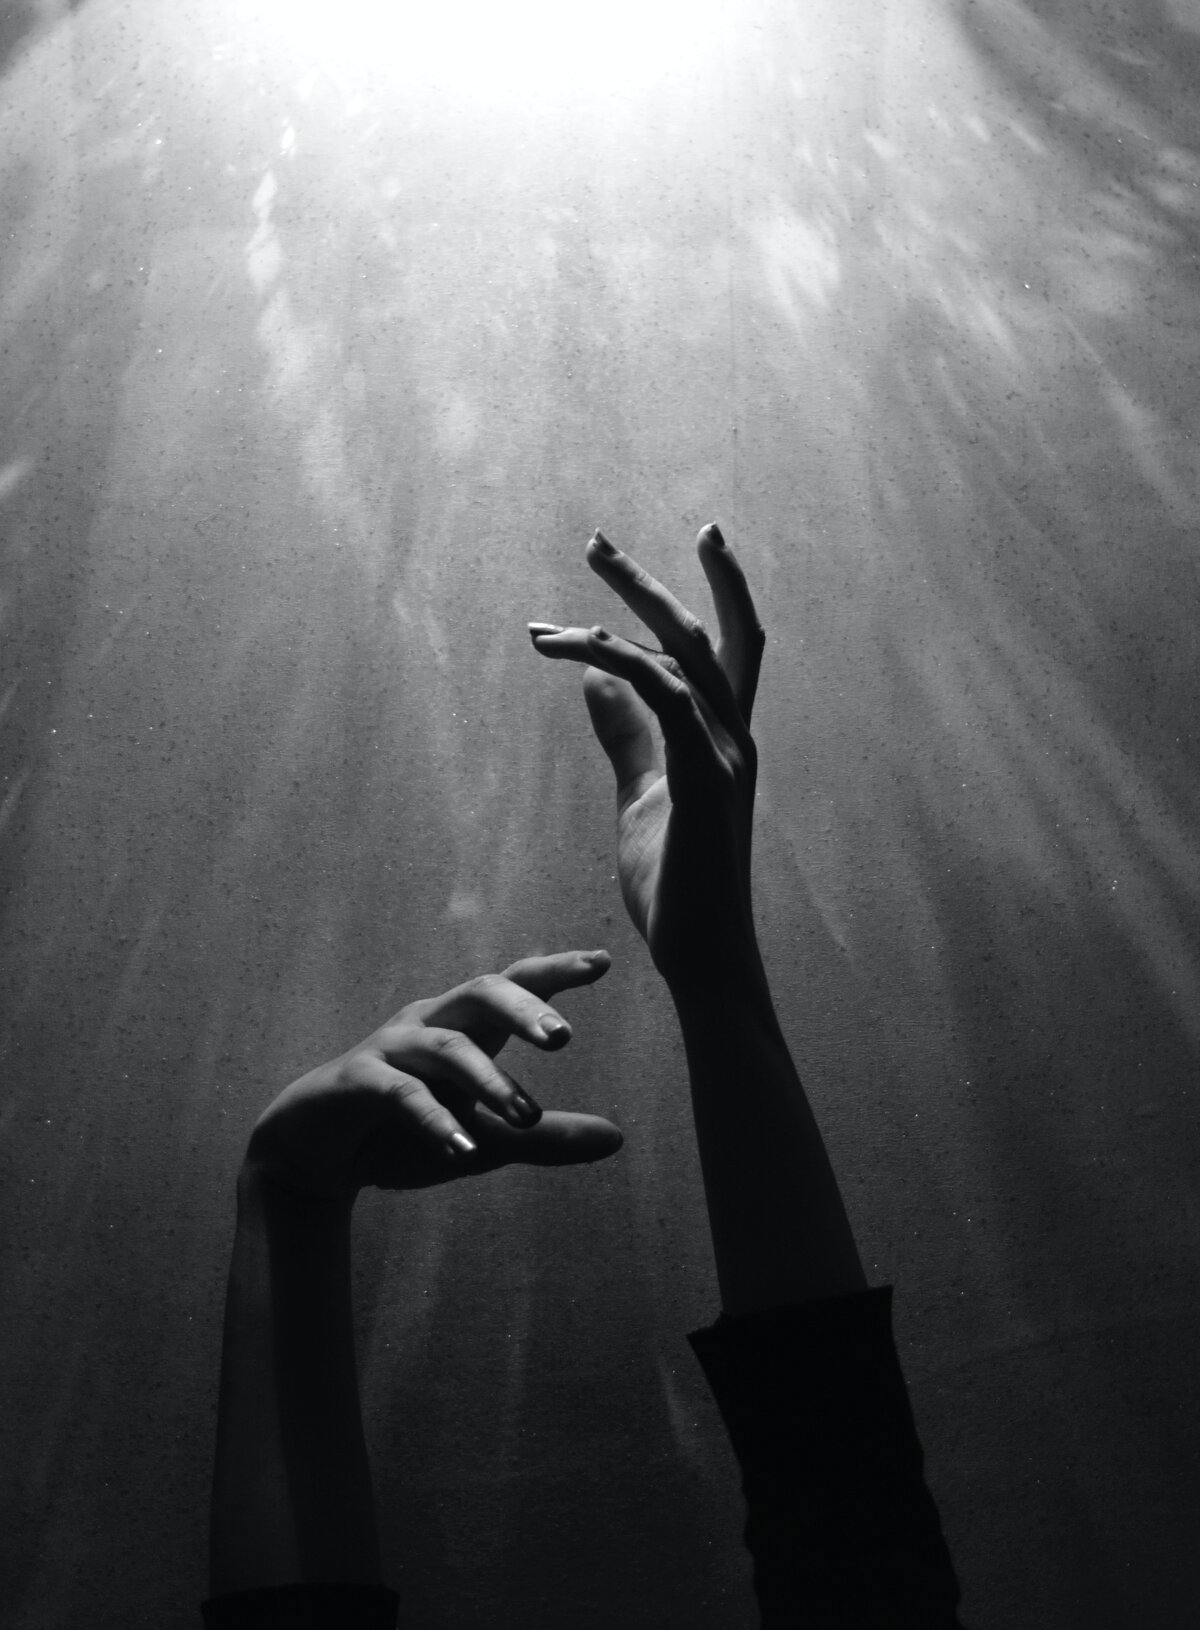 A black and white image of two hands reading up towards a white light.